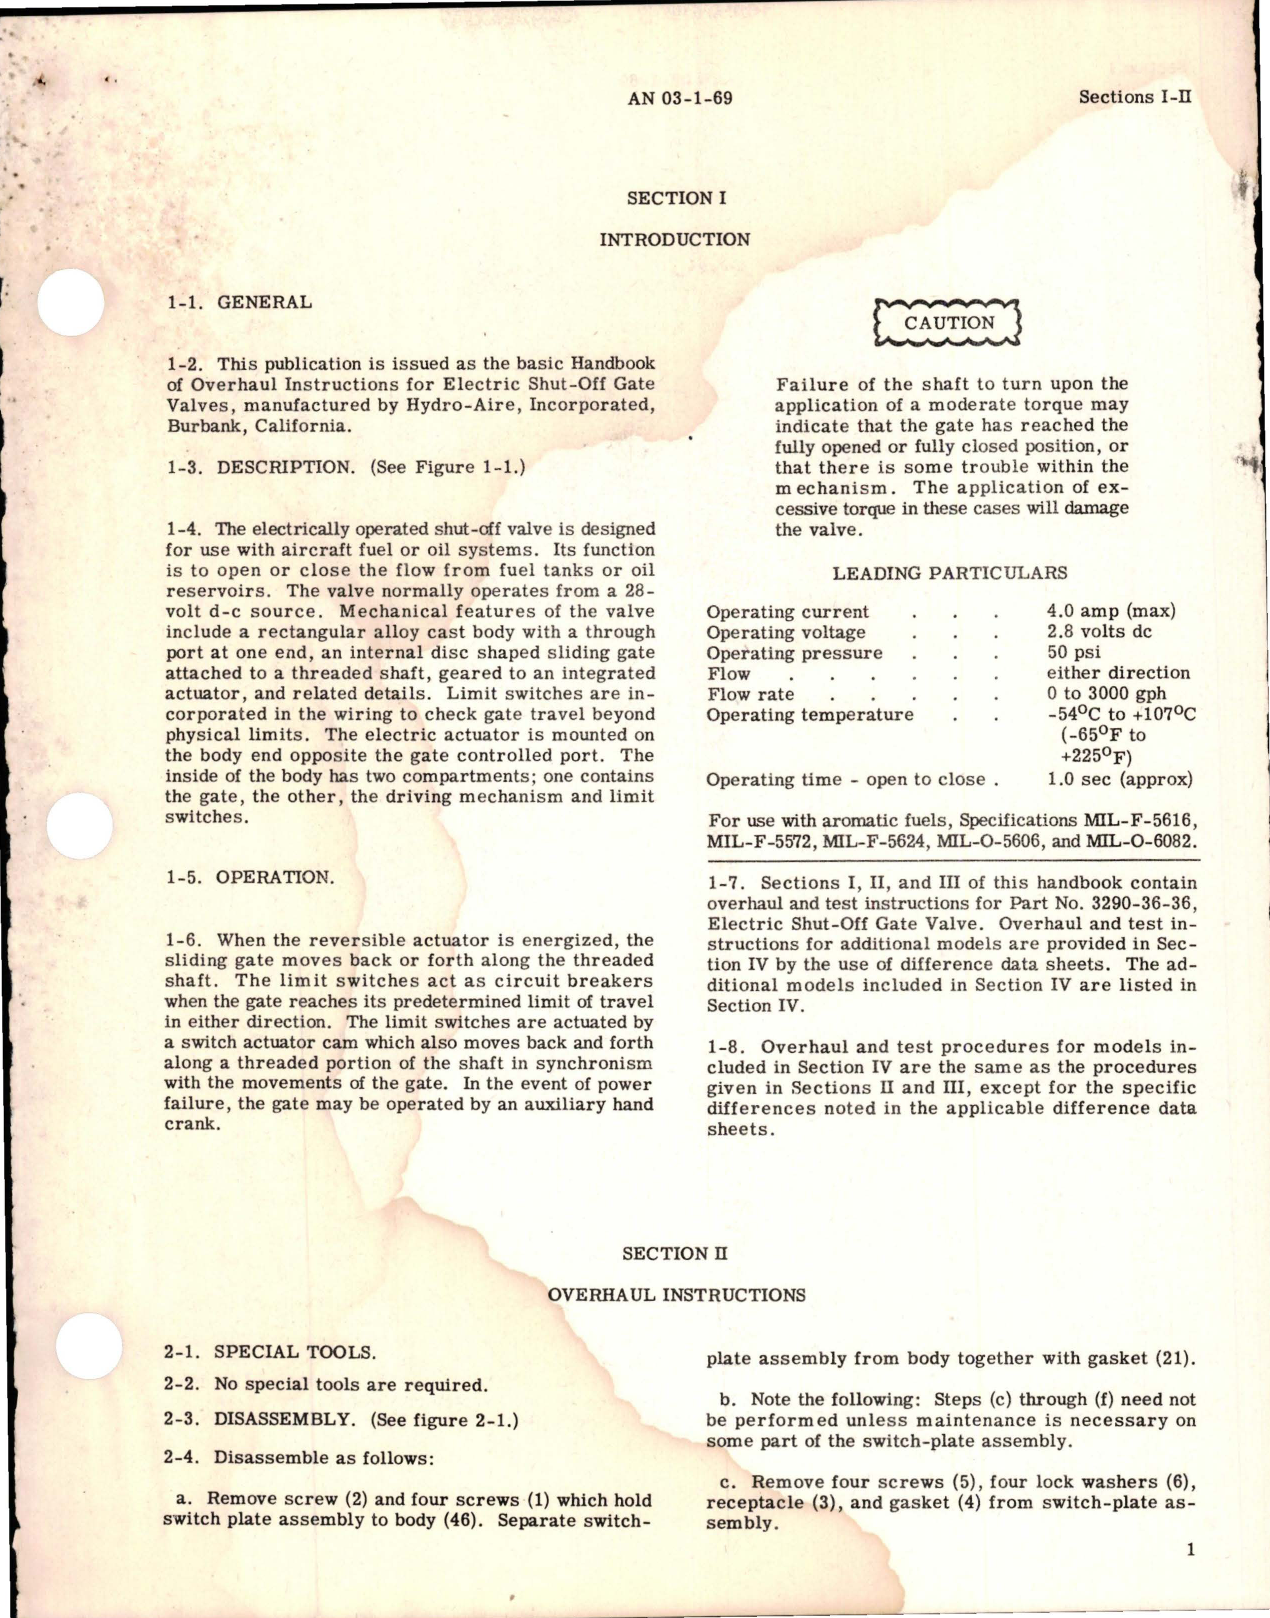 Sample page 5 from AirCorps Library document: Overhaul Instructions for Electric Shut-Off Gate Valves - Parts 